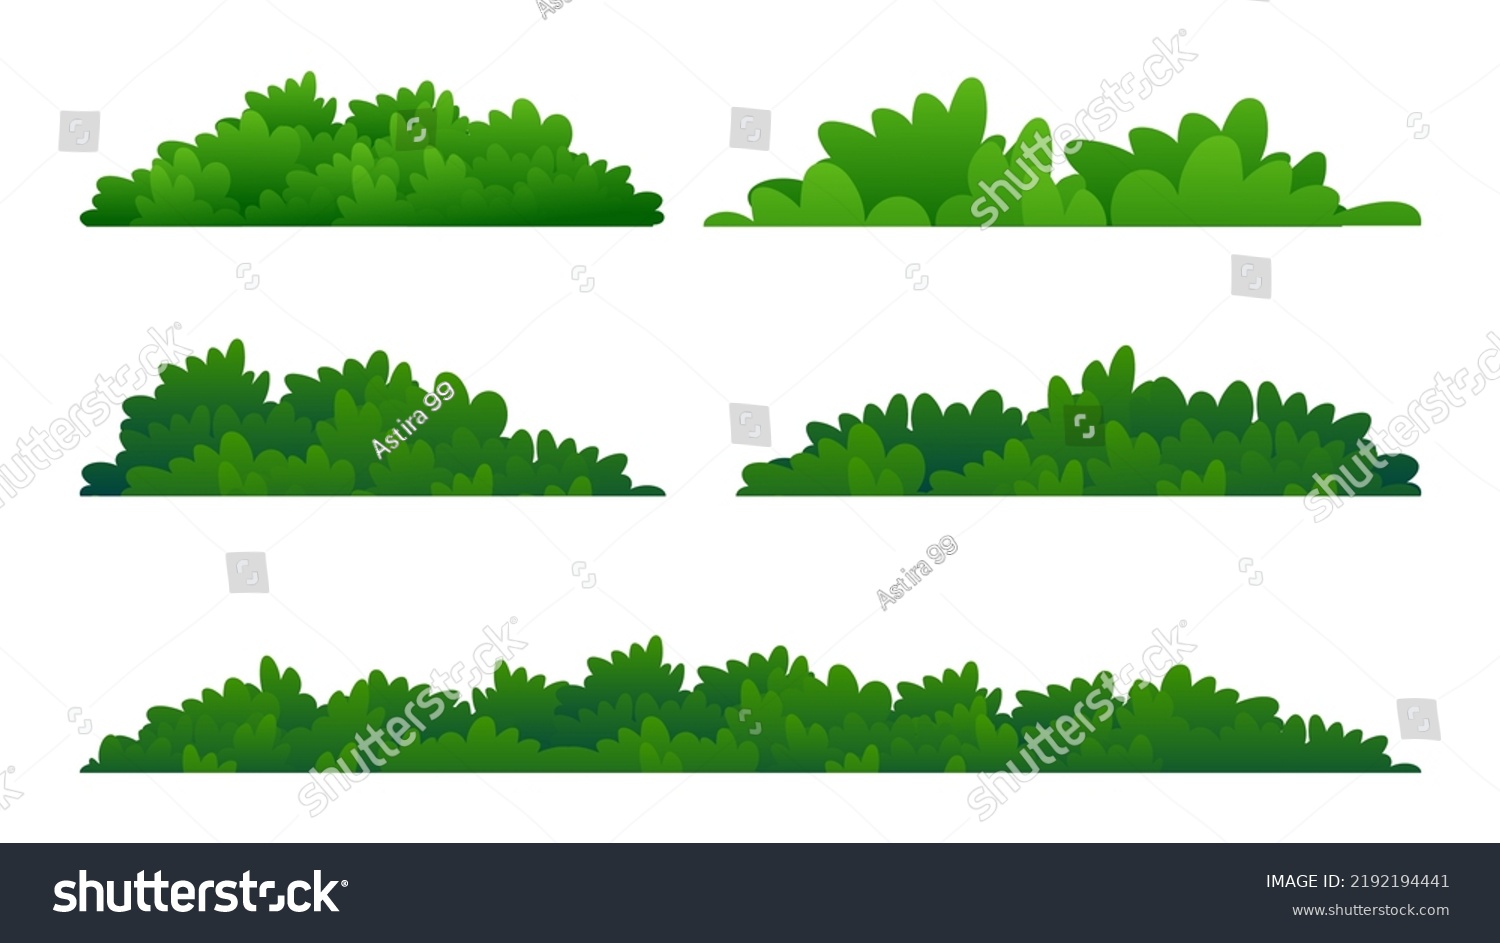 Grass and bush elements collections with flat design #2192194441